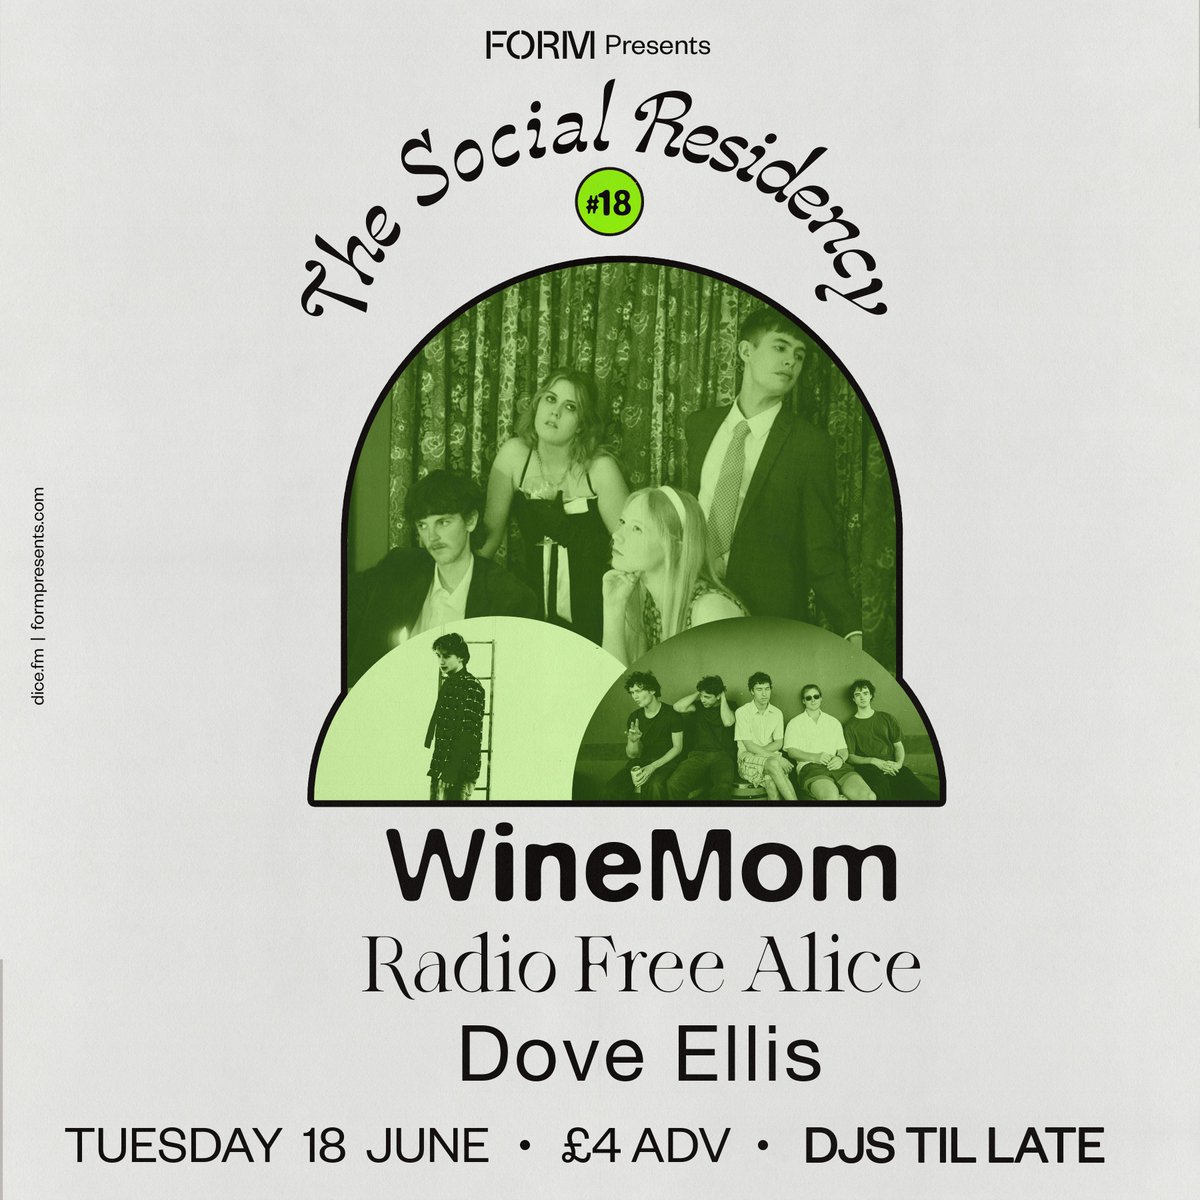 The 18th edition of our @thesociallondon residency series features Dublin-based four piece WineMom, Melbourne risers Radio Free Alice, and the Galway-born, Manchester-based Dove Ellis! 🎟 Tickets are on sale now: link.dice.fm/Q0f147938a67